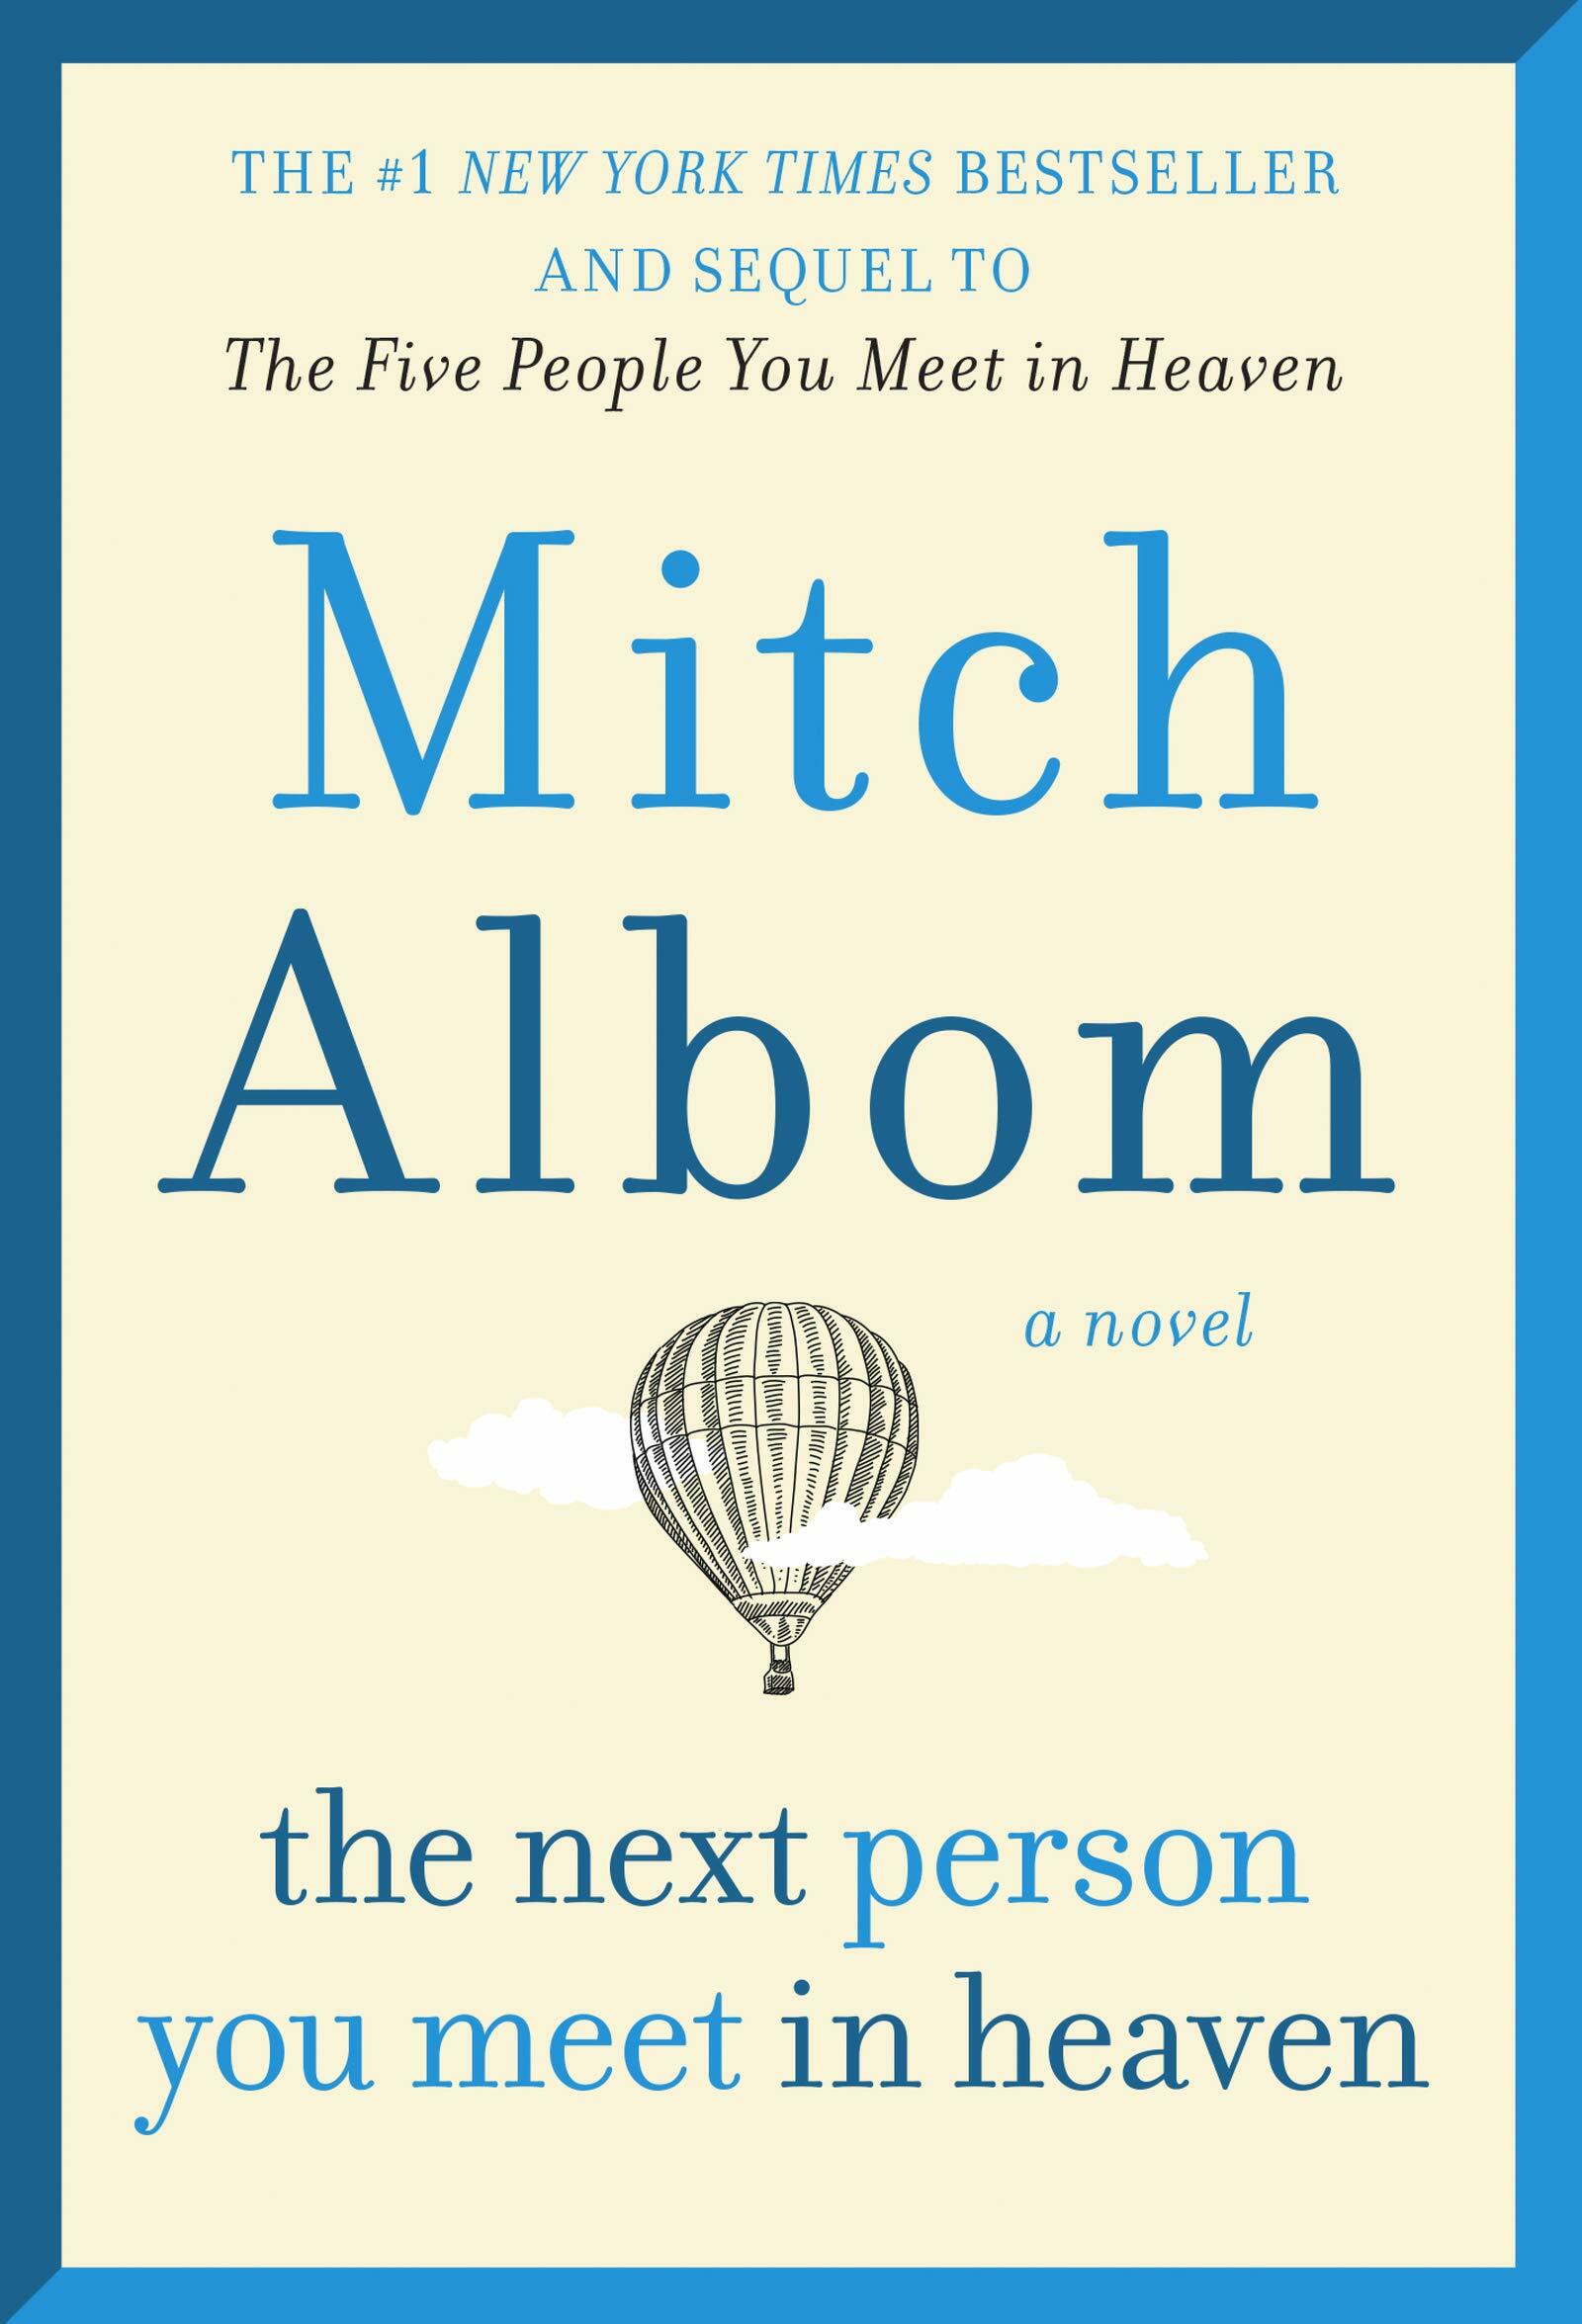 Next Person You Meet in Heaven: The Sequel to the Five People You Meet in Heaven (Mass Market Paperback)